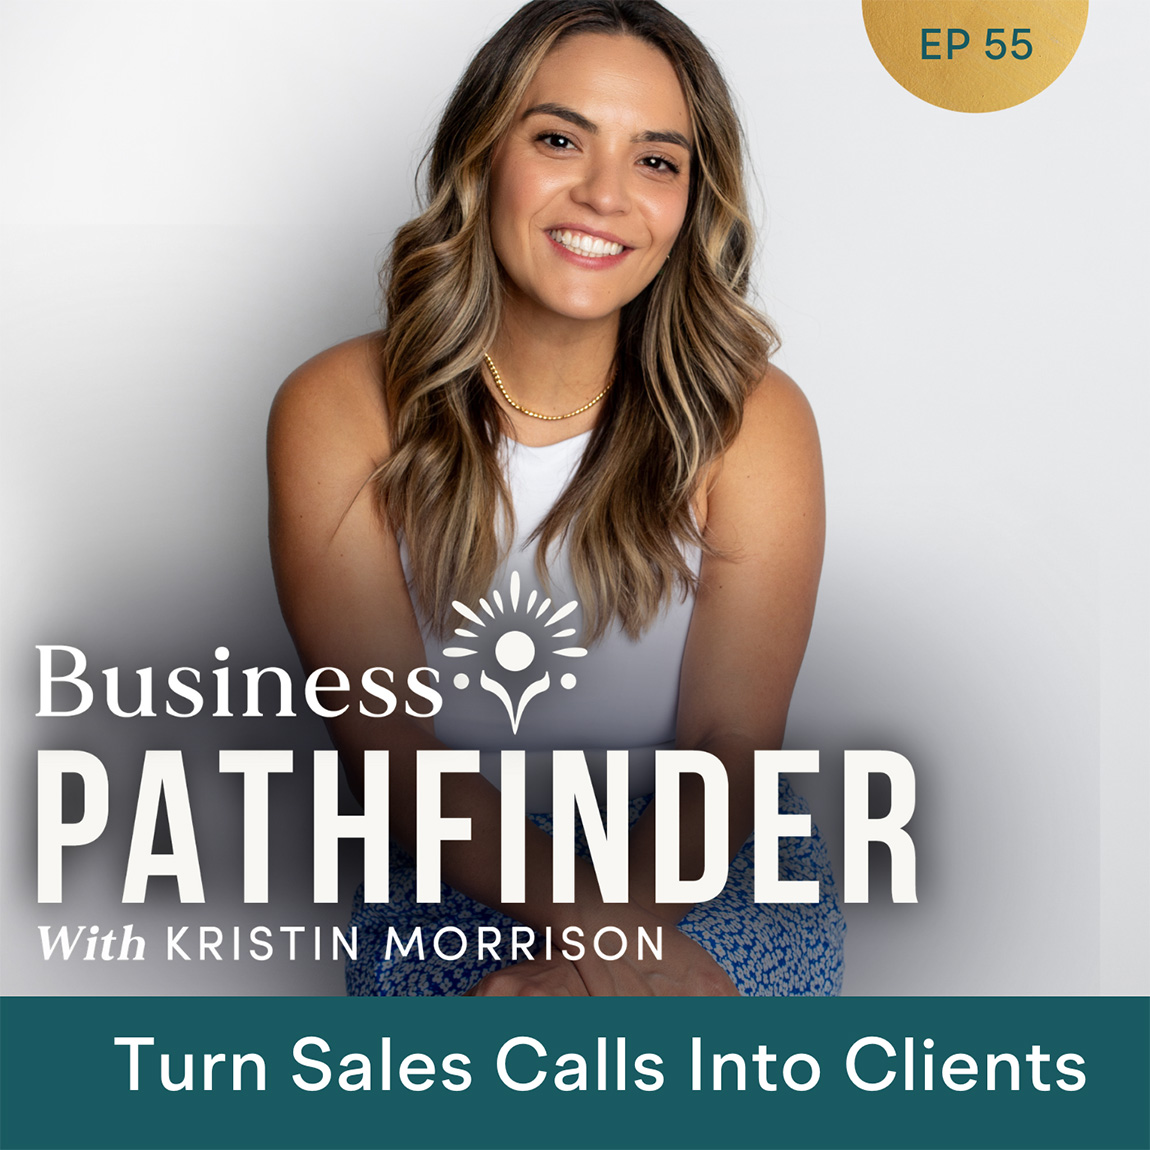 Turn Sales Calls into Clients